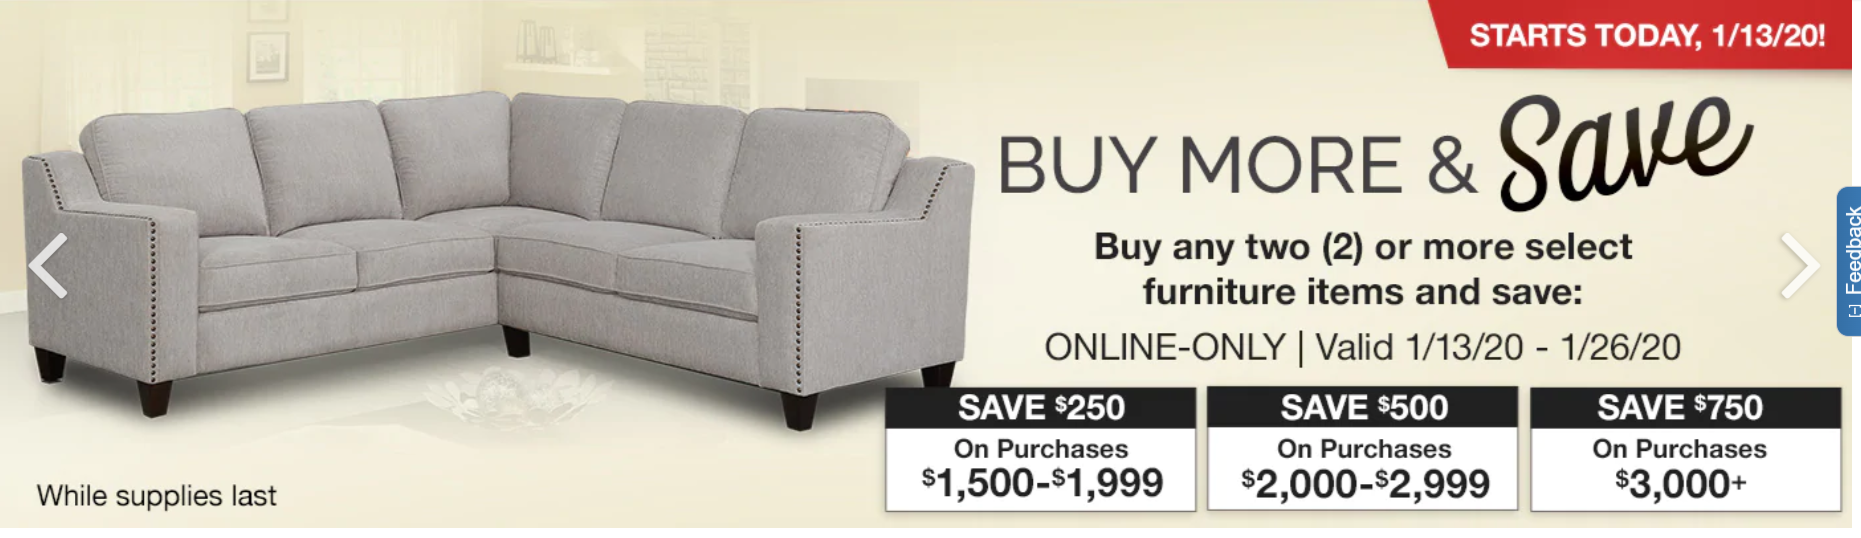 Costco Furniture Save 250 750 When You Buy 1500 Online Only